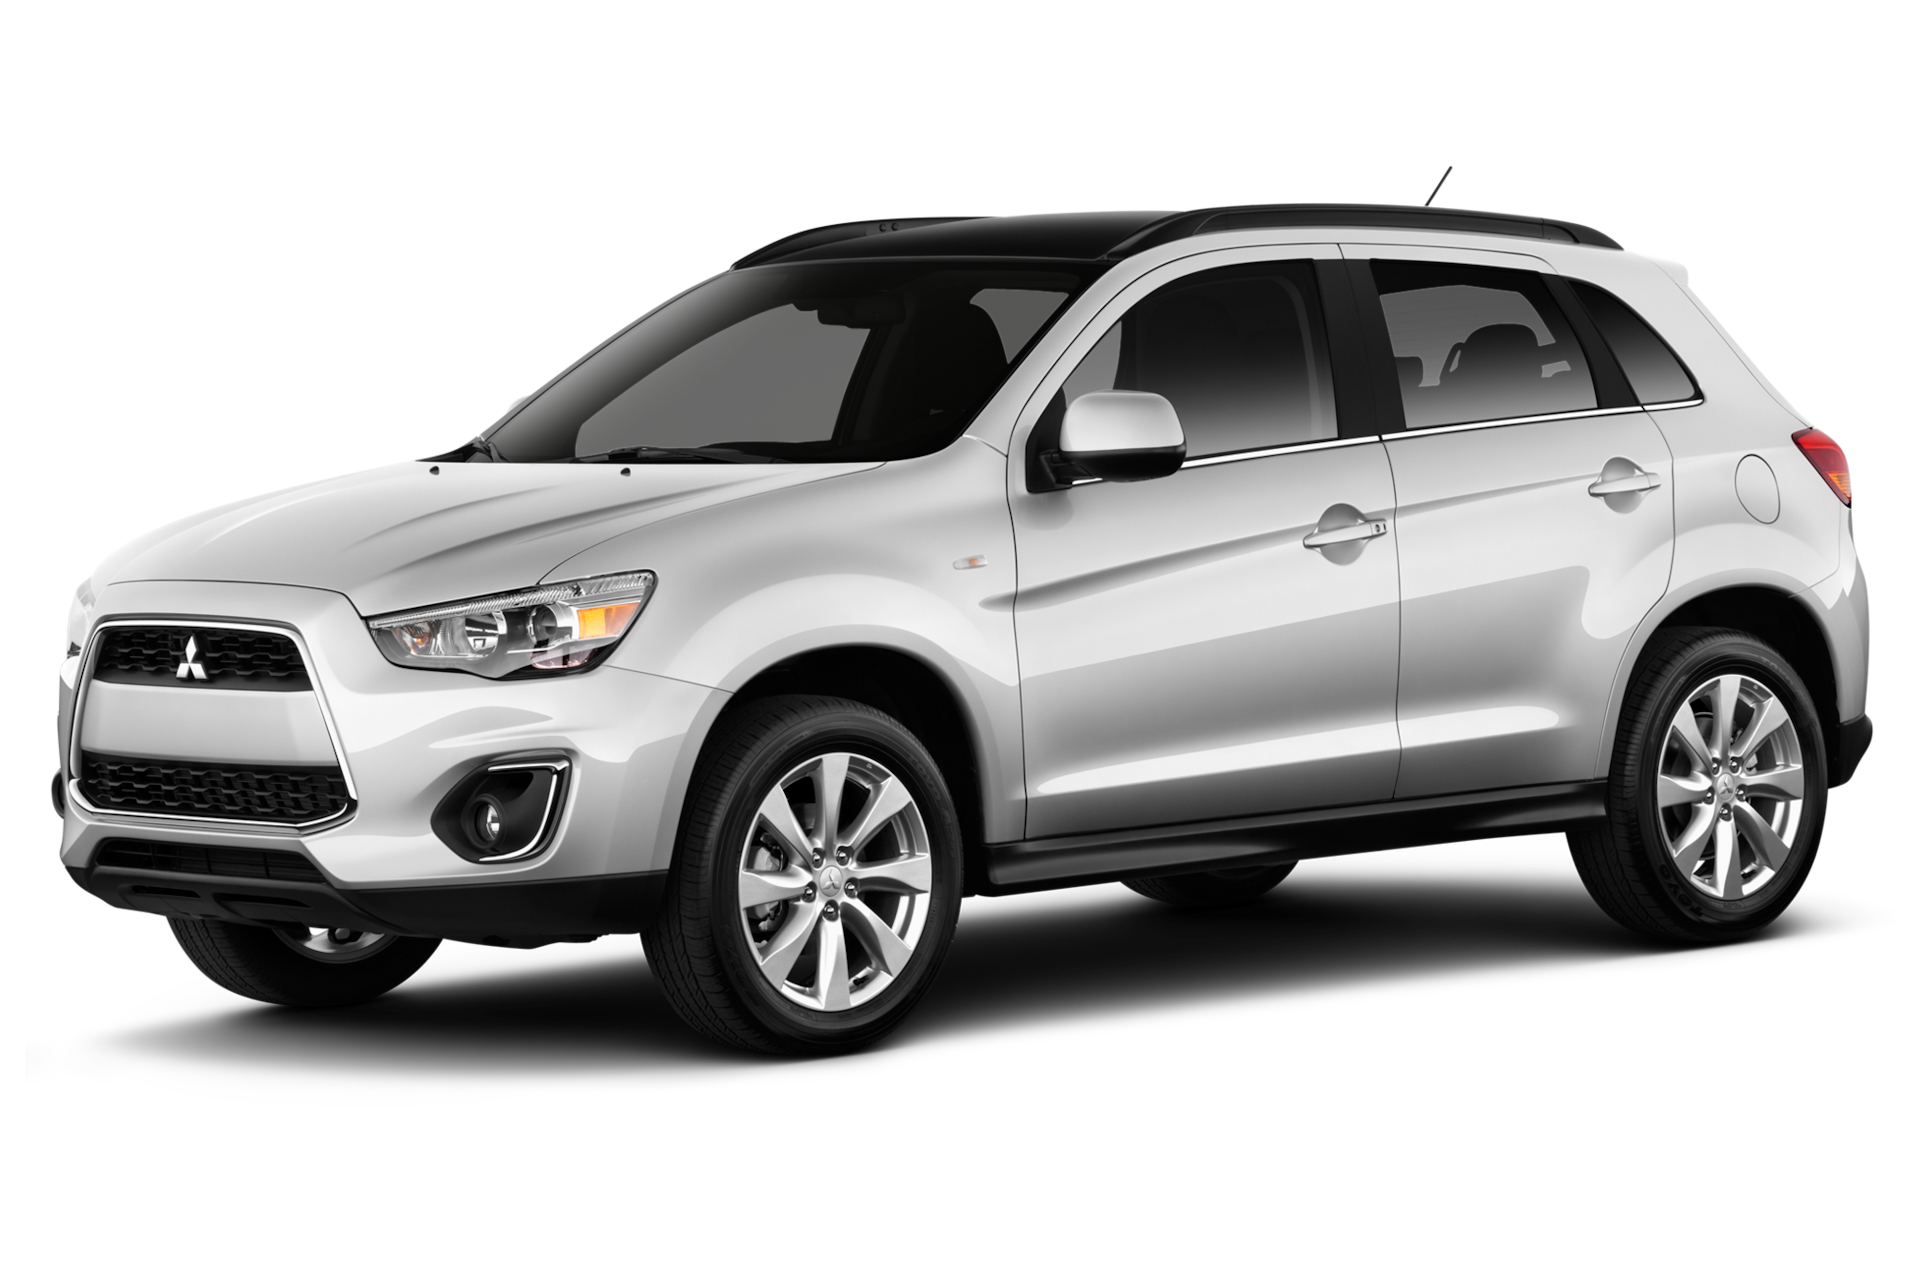 2013 Mitsubishi Outlander Sport Prices, Reviews, and Photos - MotorTrend